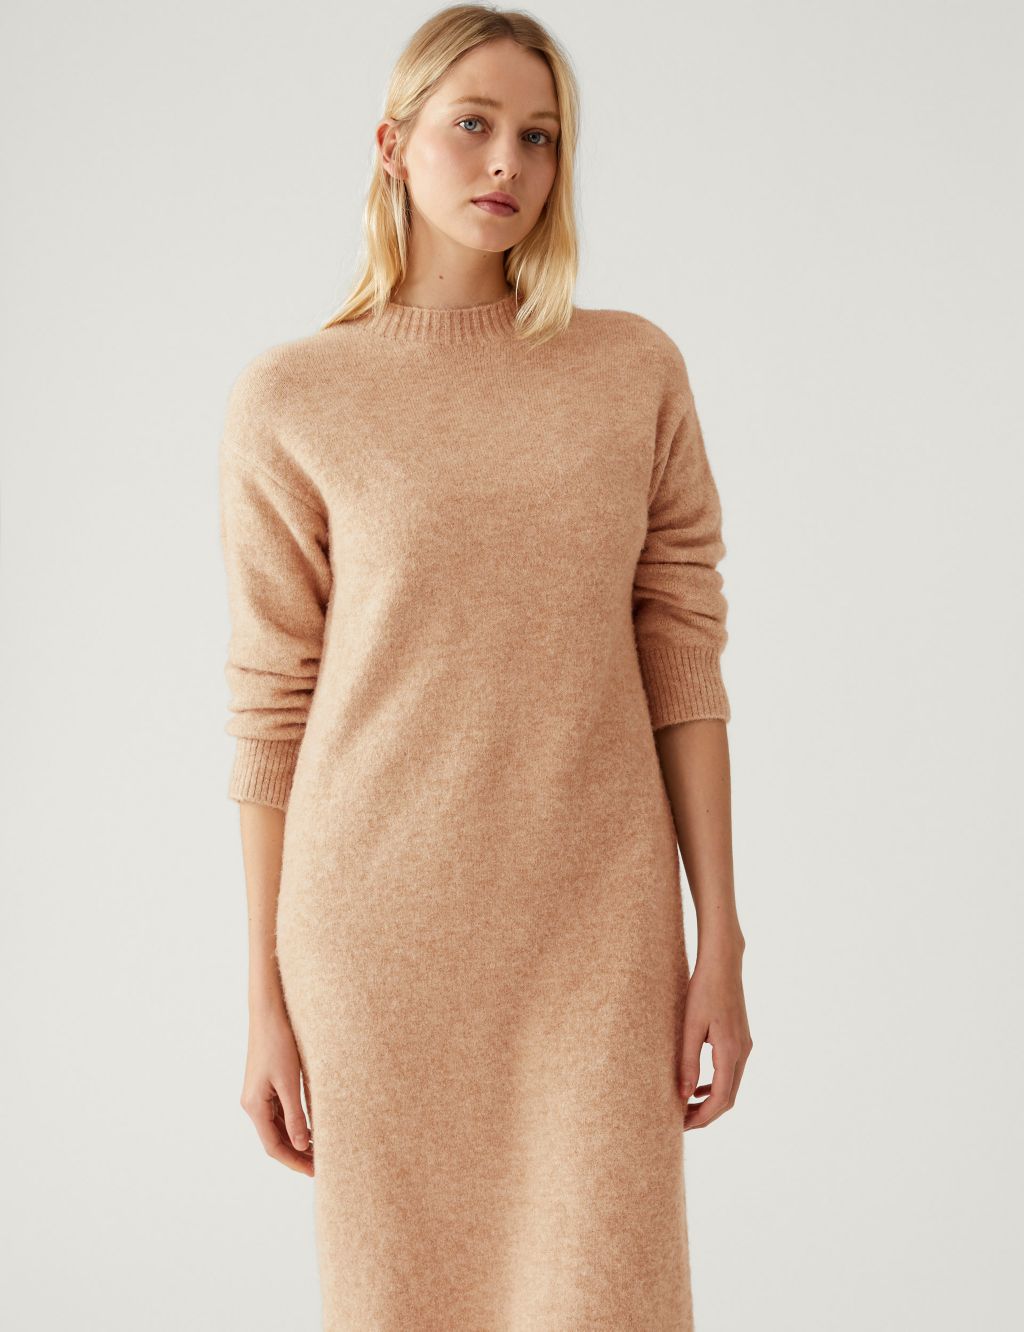 Knitted Crew Neck Dress image 4